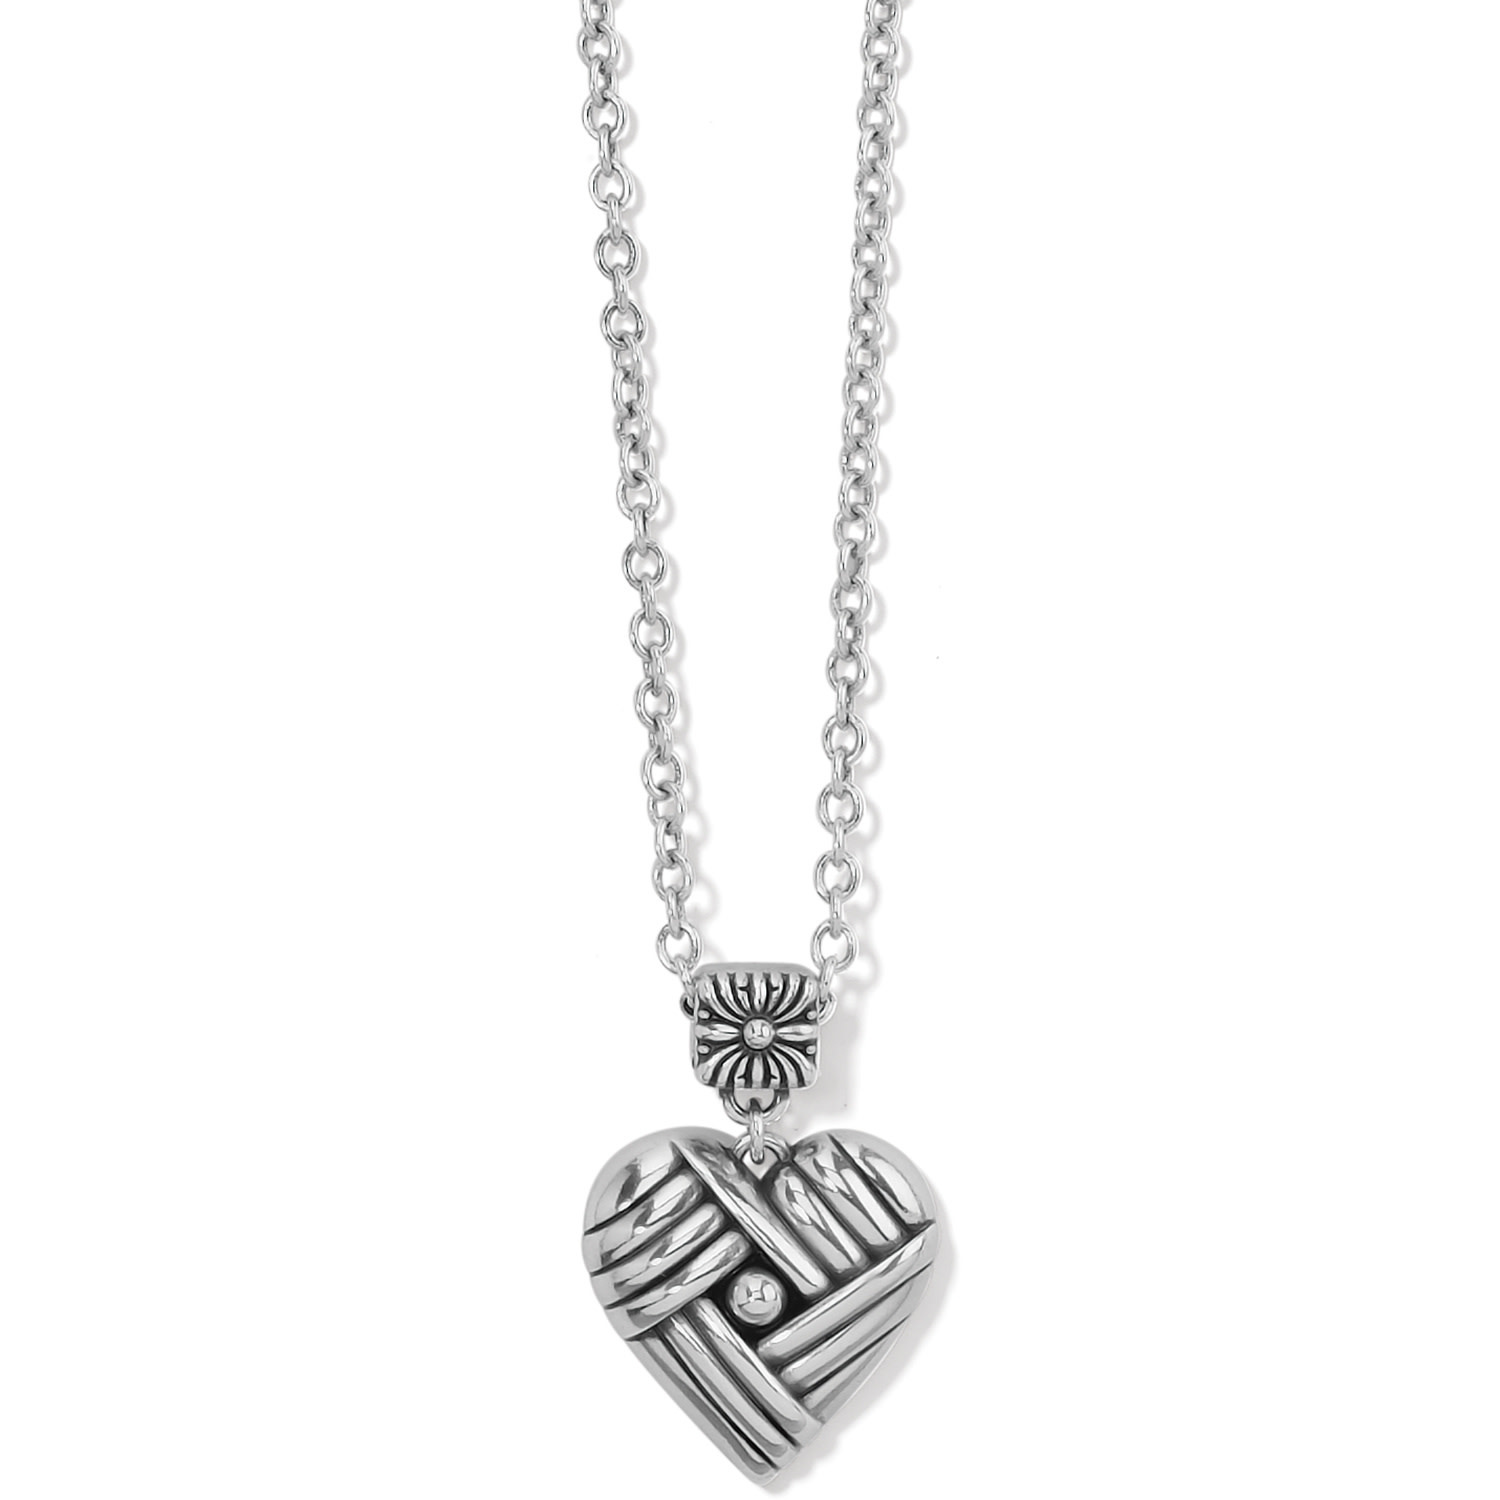 Brighton Ophelia Heart Leather Necklace – The Added Touch